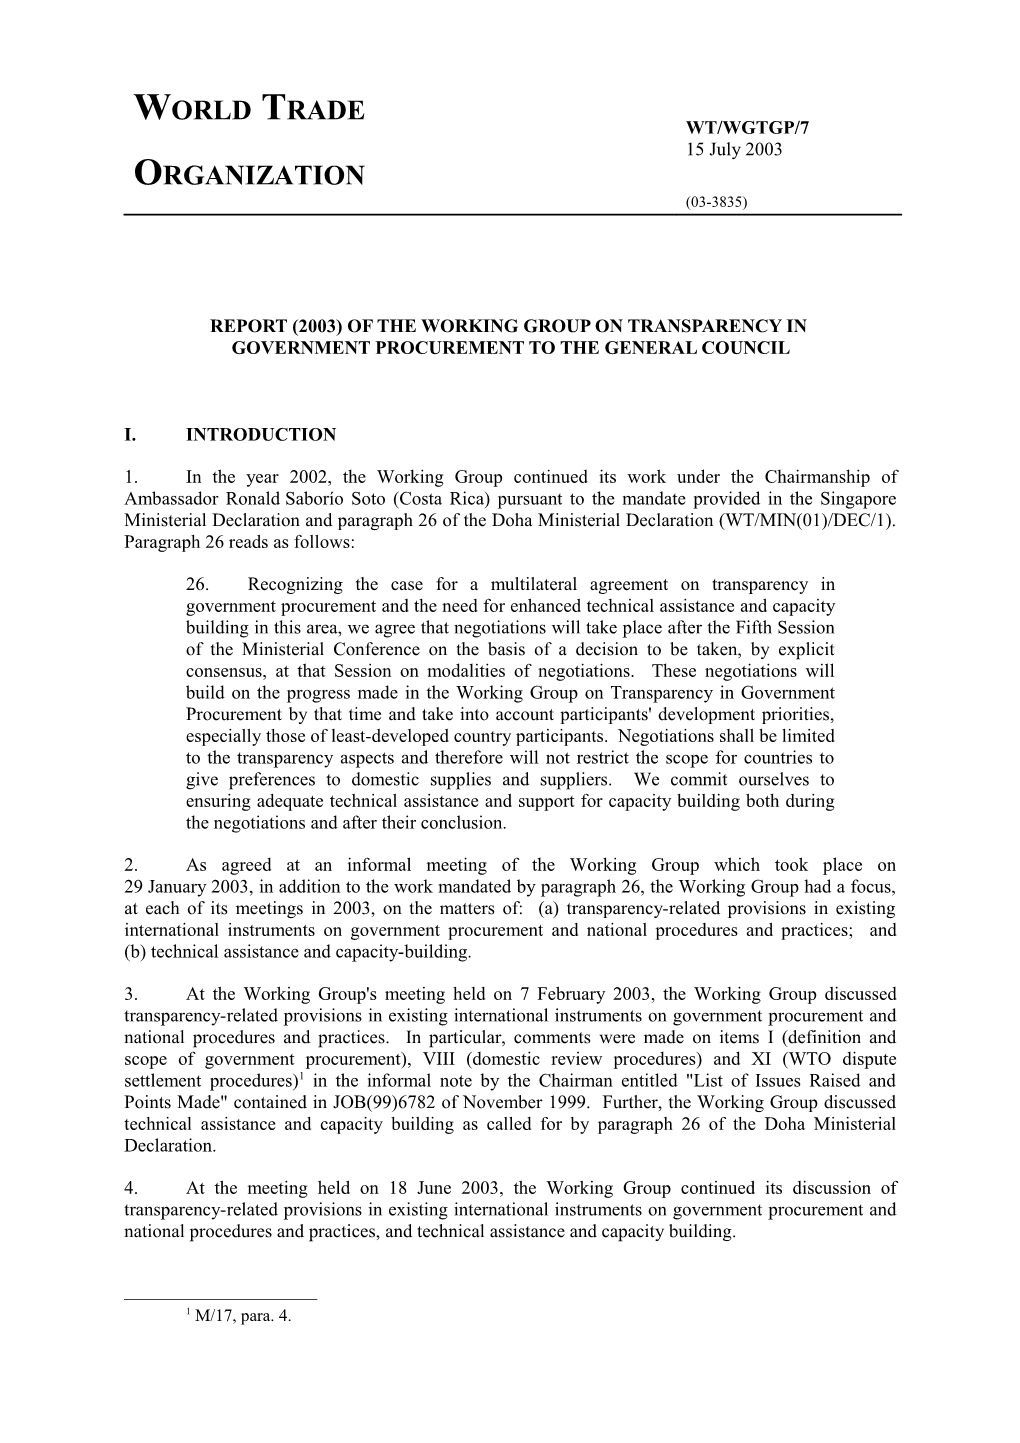 Report (2003) of the Working Group on Transparency In